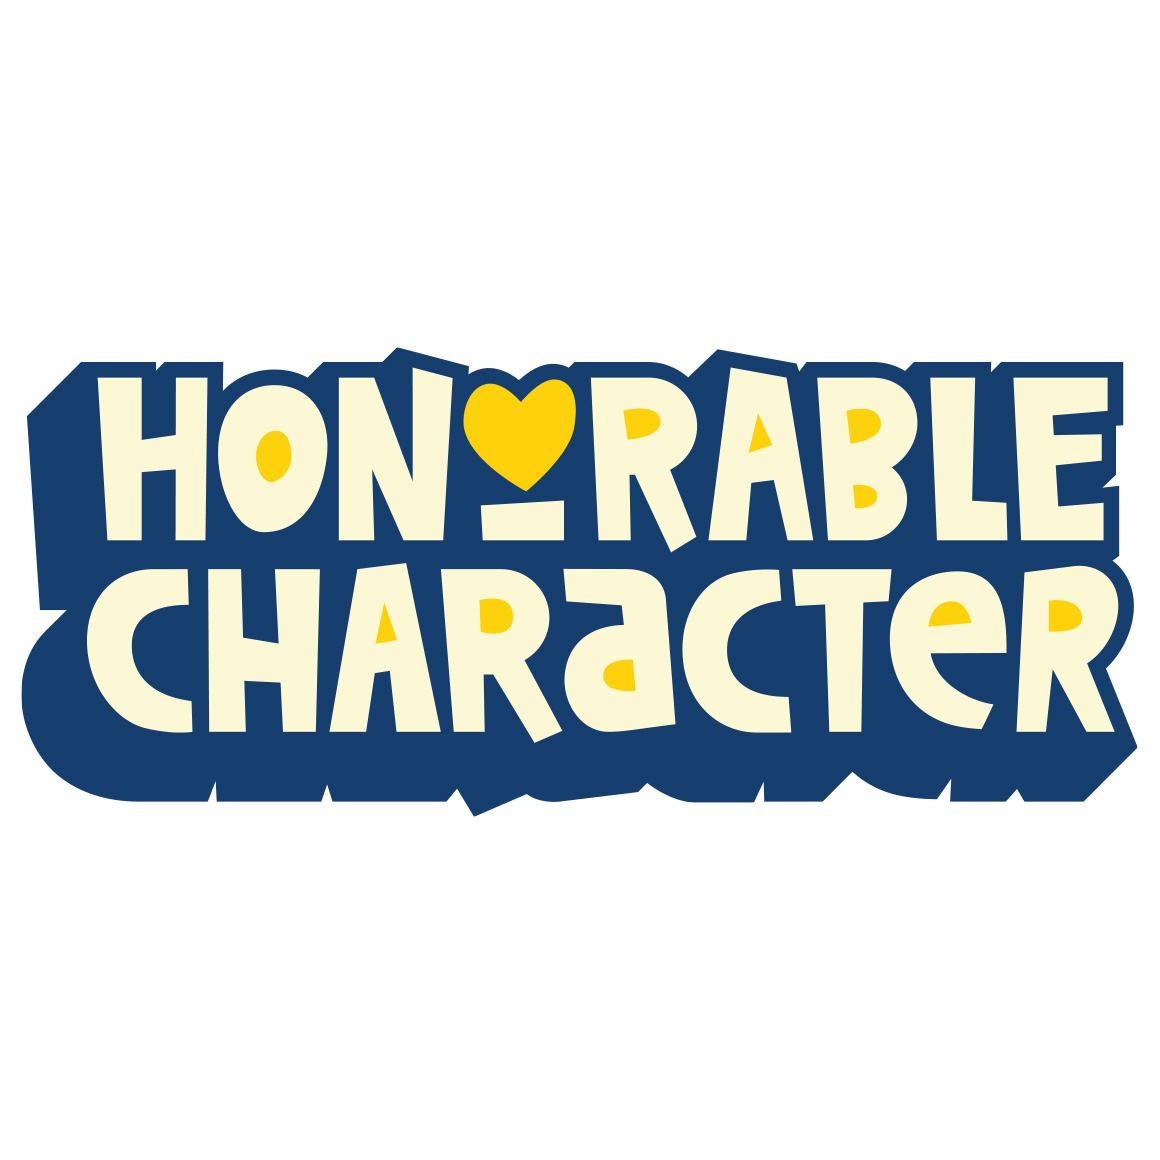 Honorable Character logo design by logo designer Joshua Berman Design for your inspiration and for the worlds largest logo competition